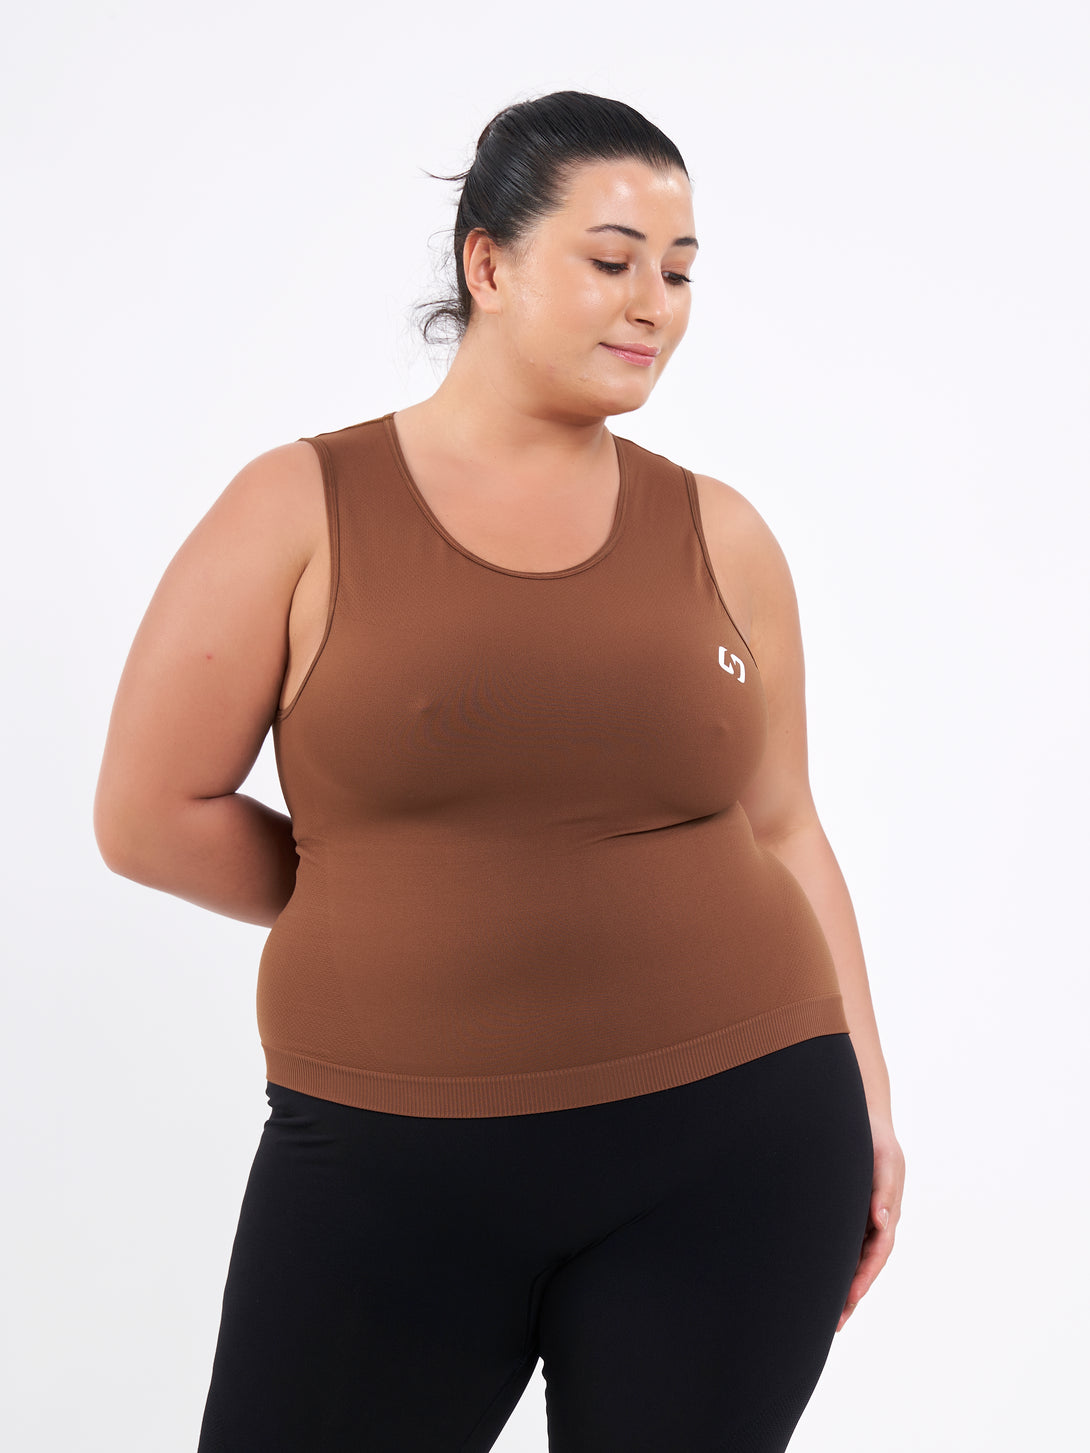 A Women Wearing Toffe Brown Color Zen Confidence Seamless Compressive Crop Top. Sculpted Silhouette